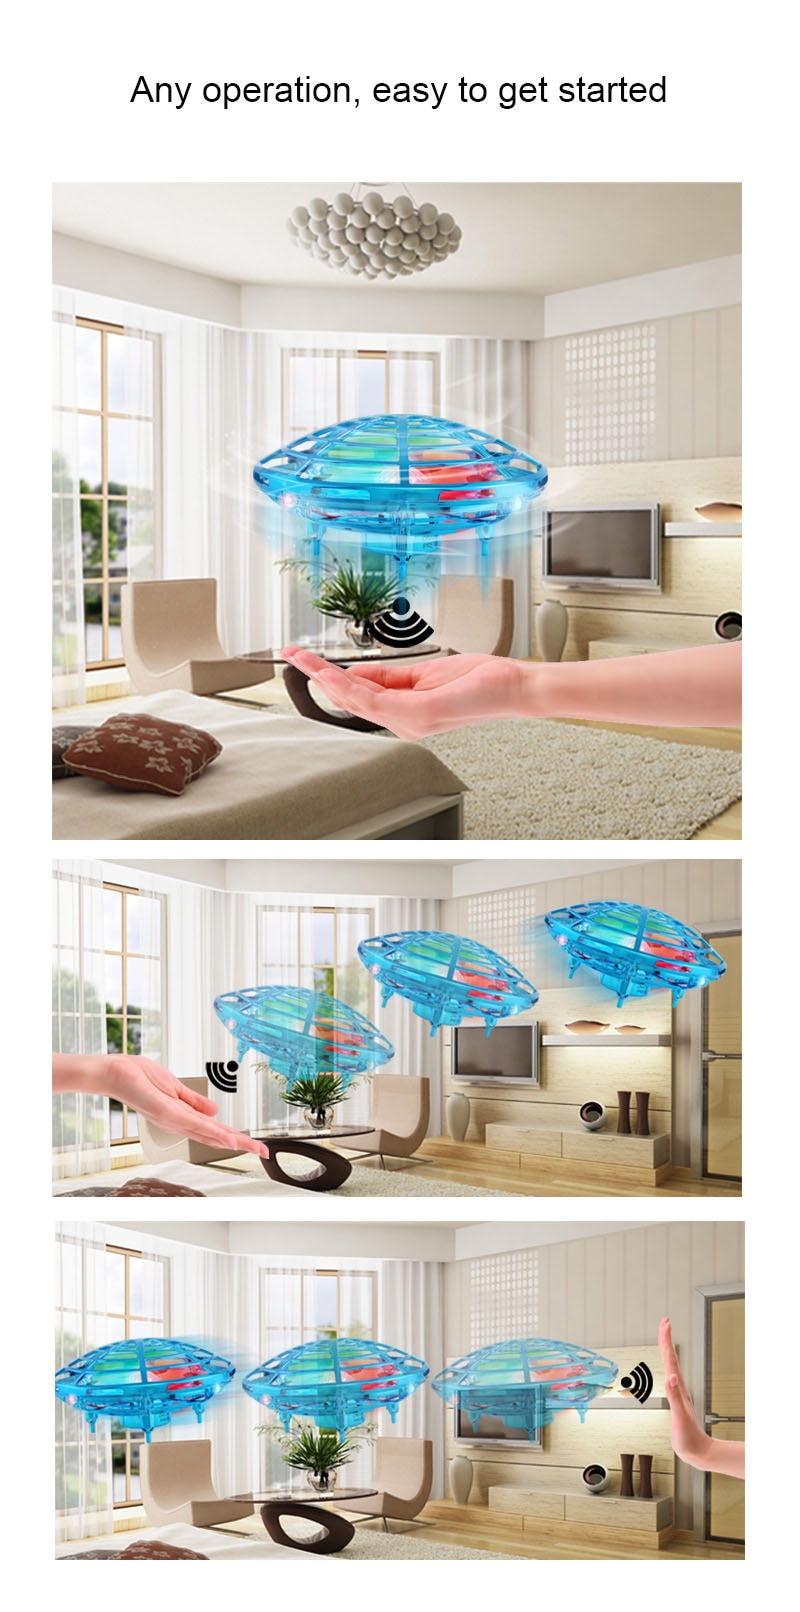 Hand Induction Flying UFO Drone